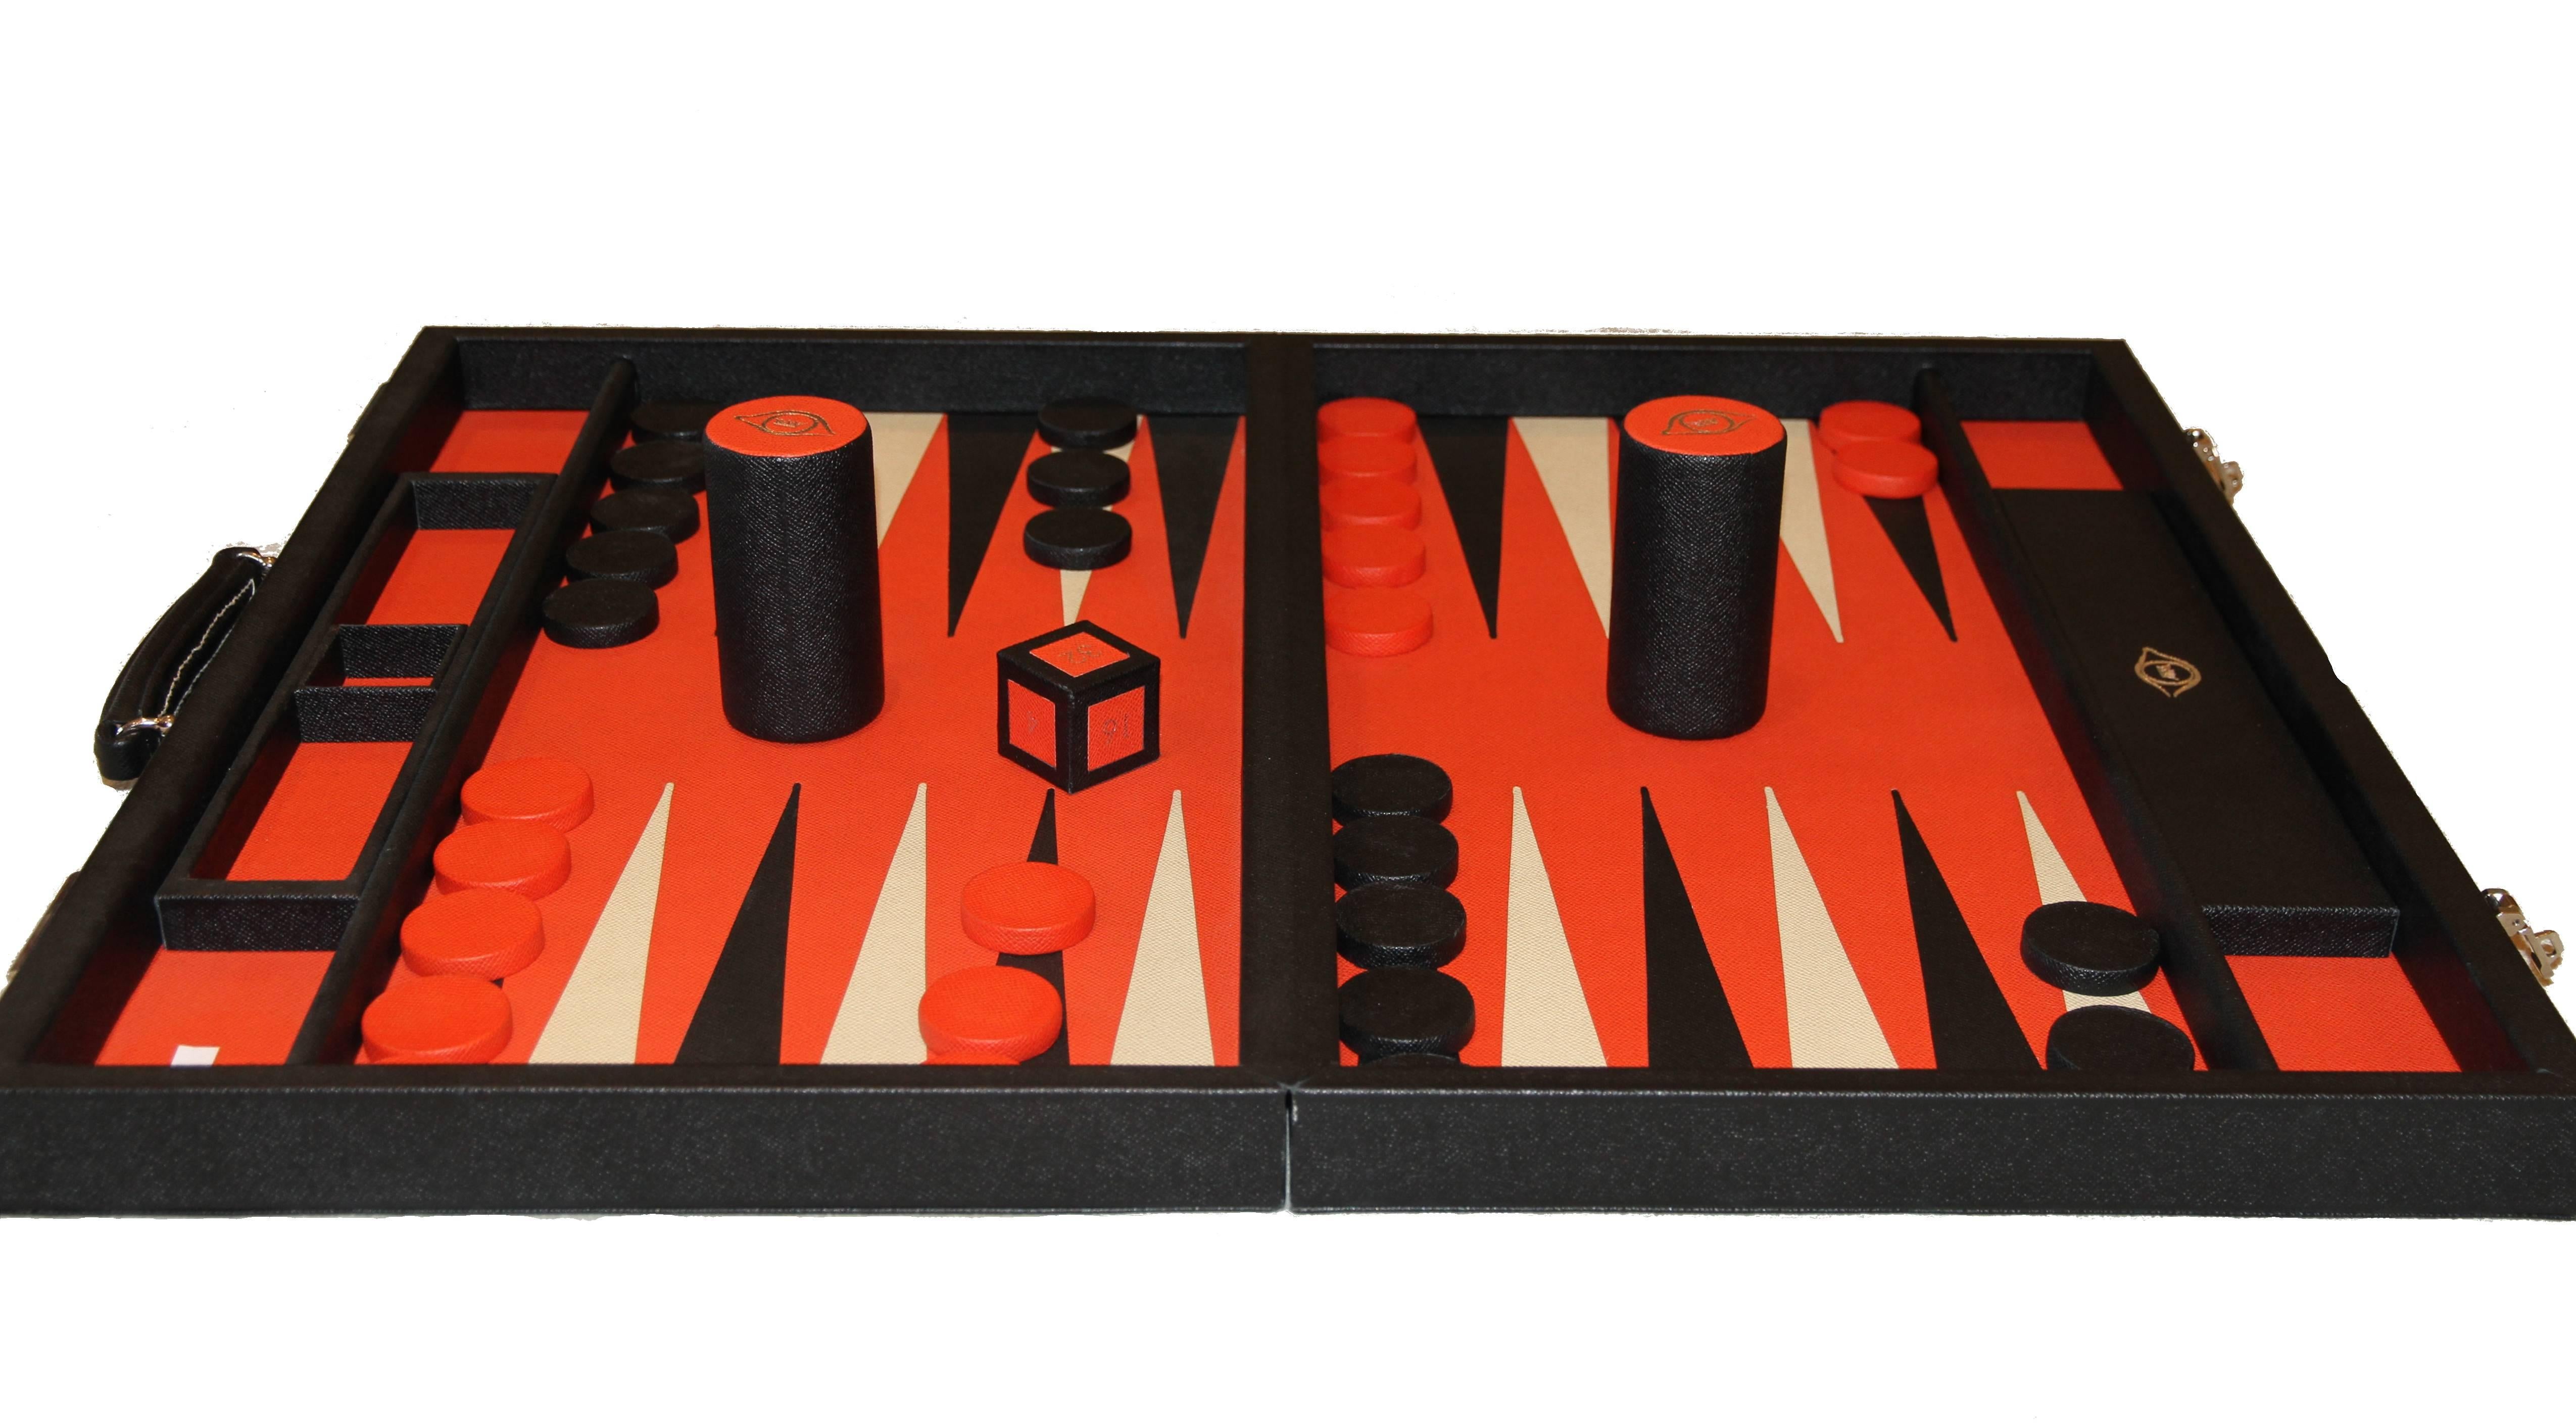 This game set was custom made by Geoffrey Parker for LECLAIREUR in 2016
From that first chessboard, backgammon was the next obvious game where precise inlaying was de rigueur. By the early 1970s, the Company had already established itself as No.1 in